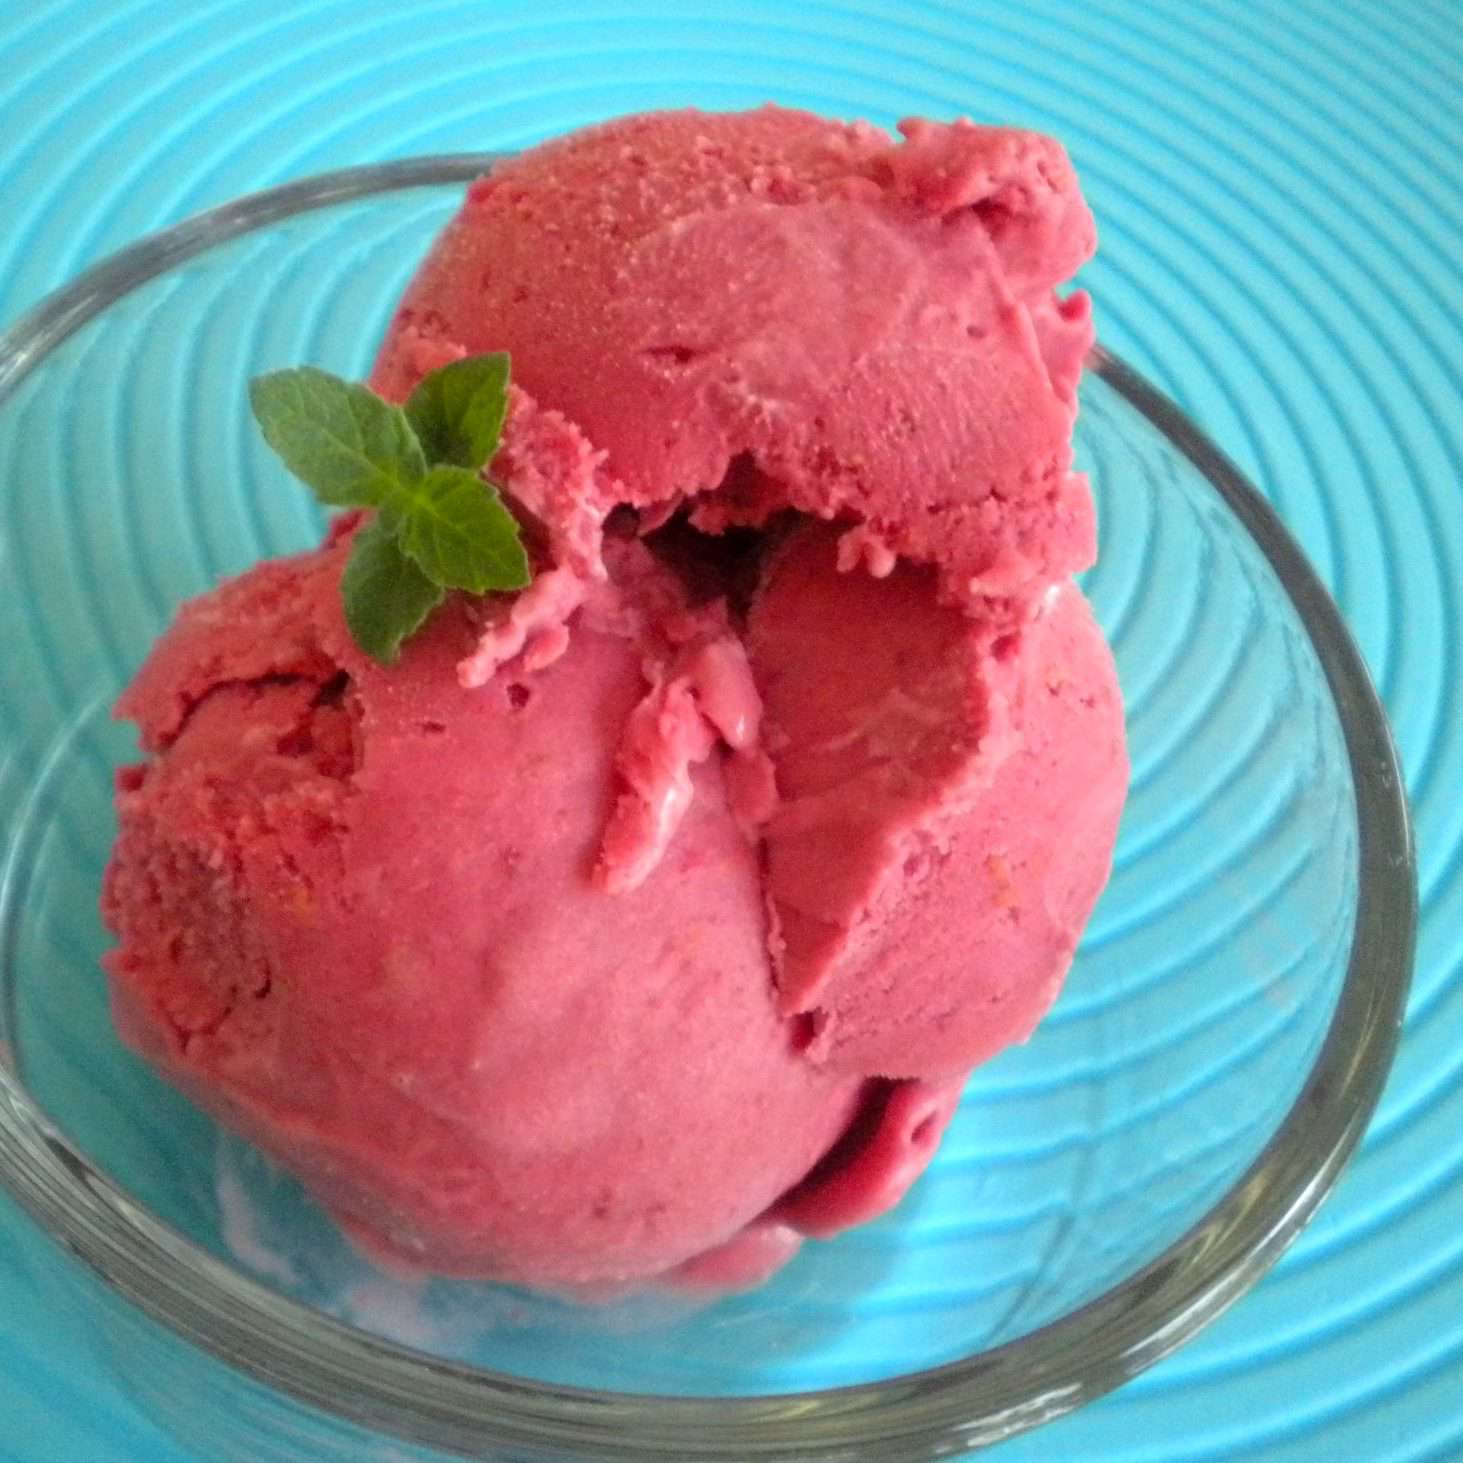 22 Easy Ways to Make Ice Cream Without an Ice Cream Machine